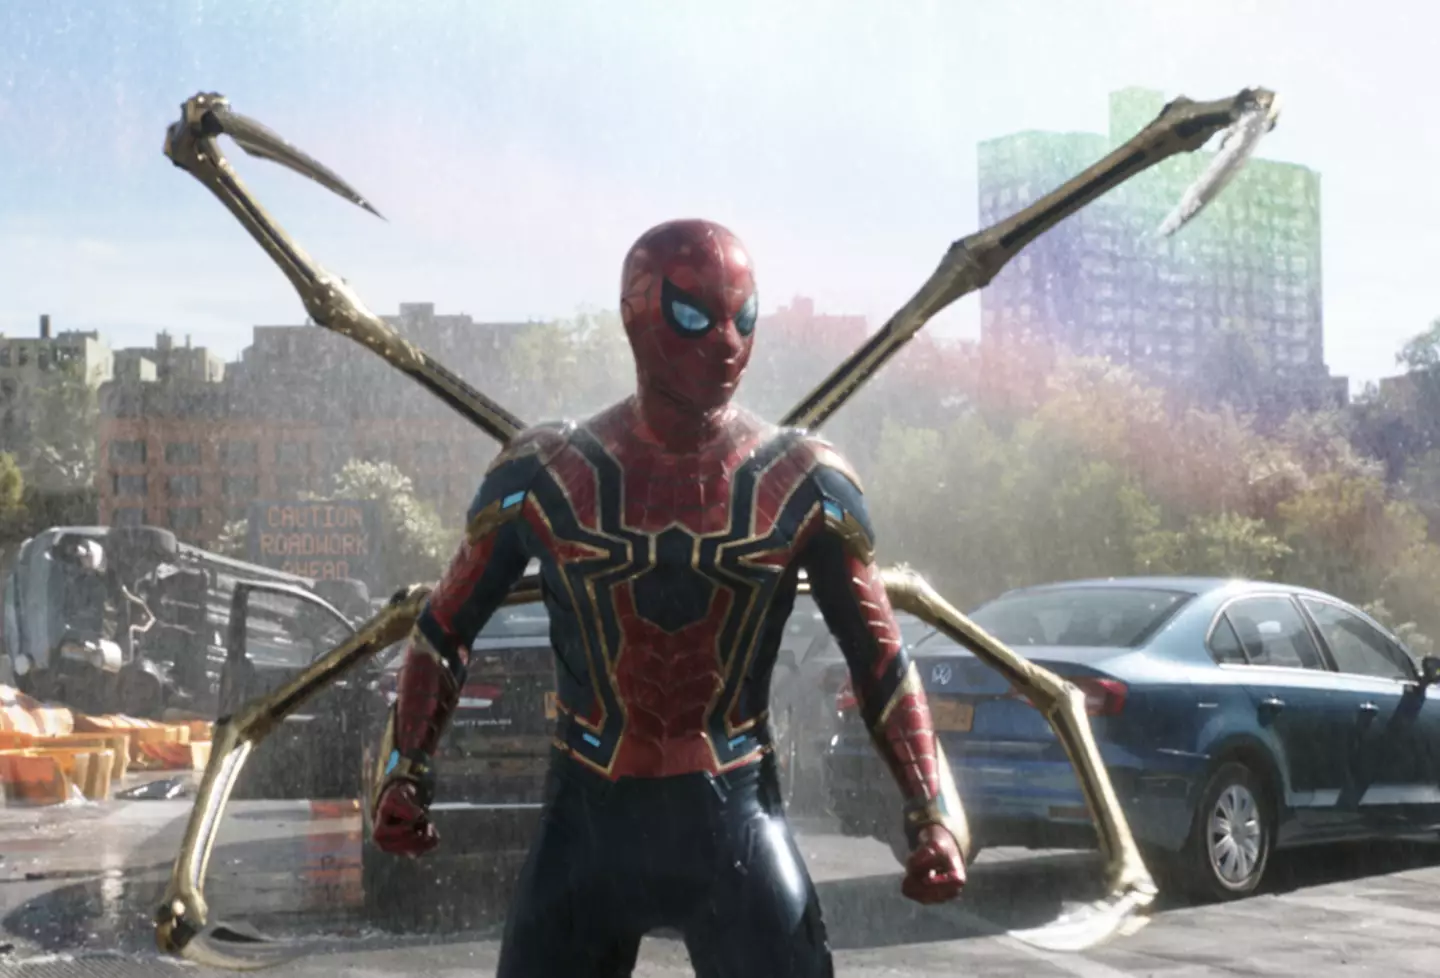 Spider-Man exists in the MCU due to a collaboration between Marvel and Sony.